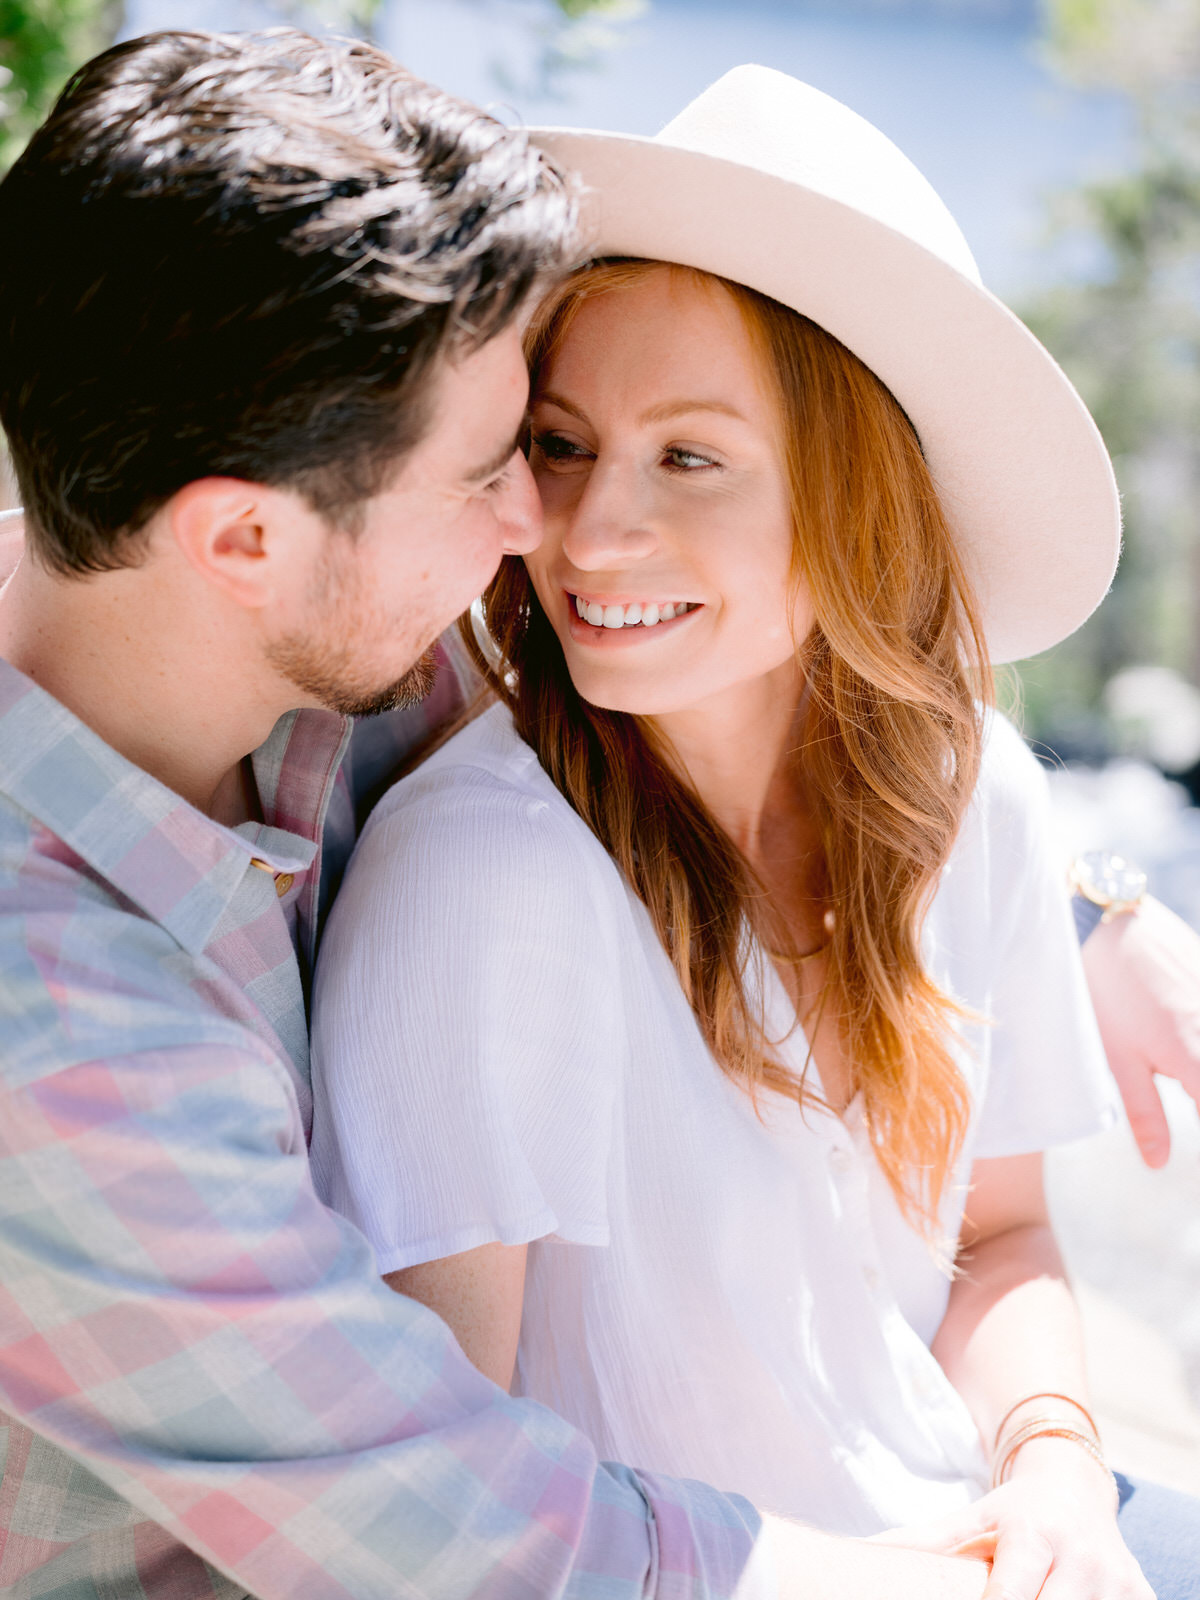 How to pick an engagement session location. Couple cuddling and smiling at one another.